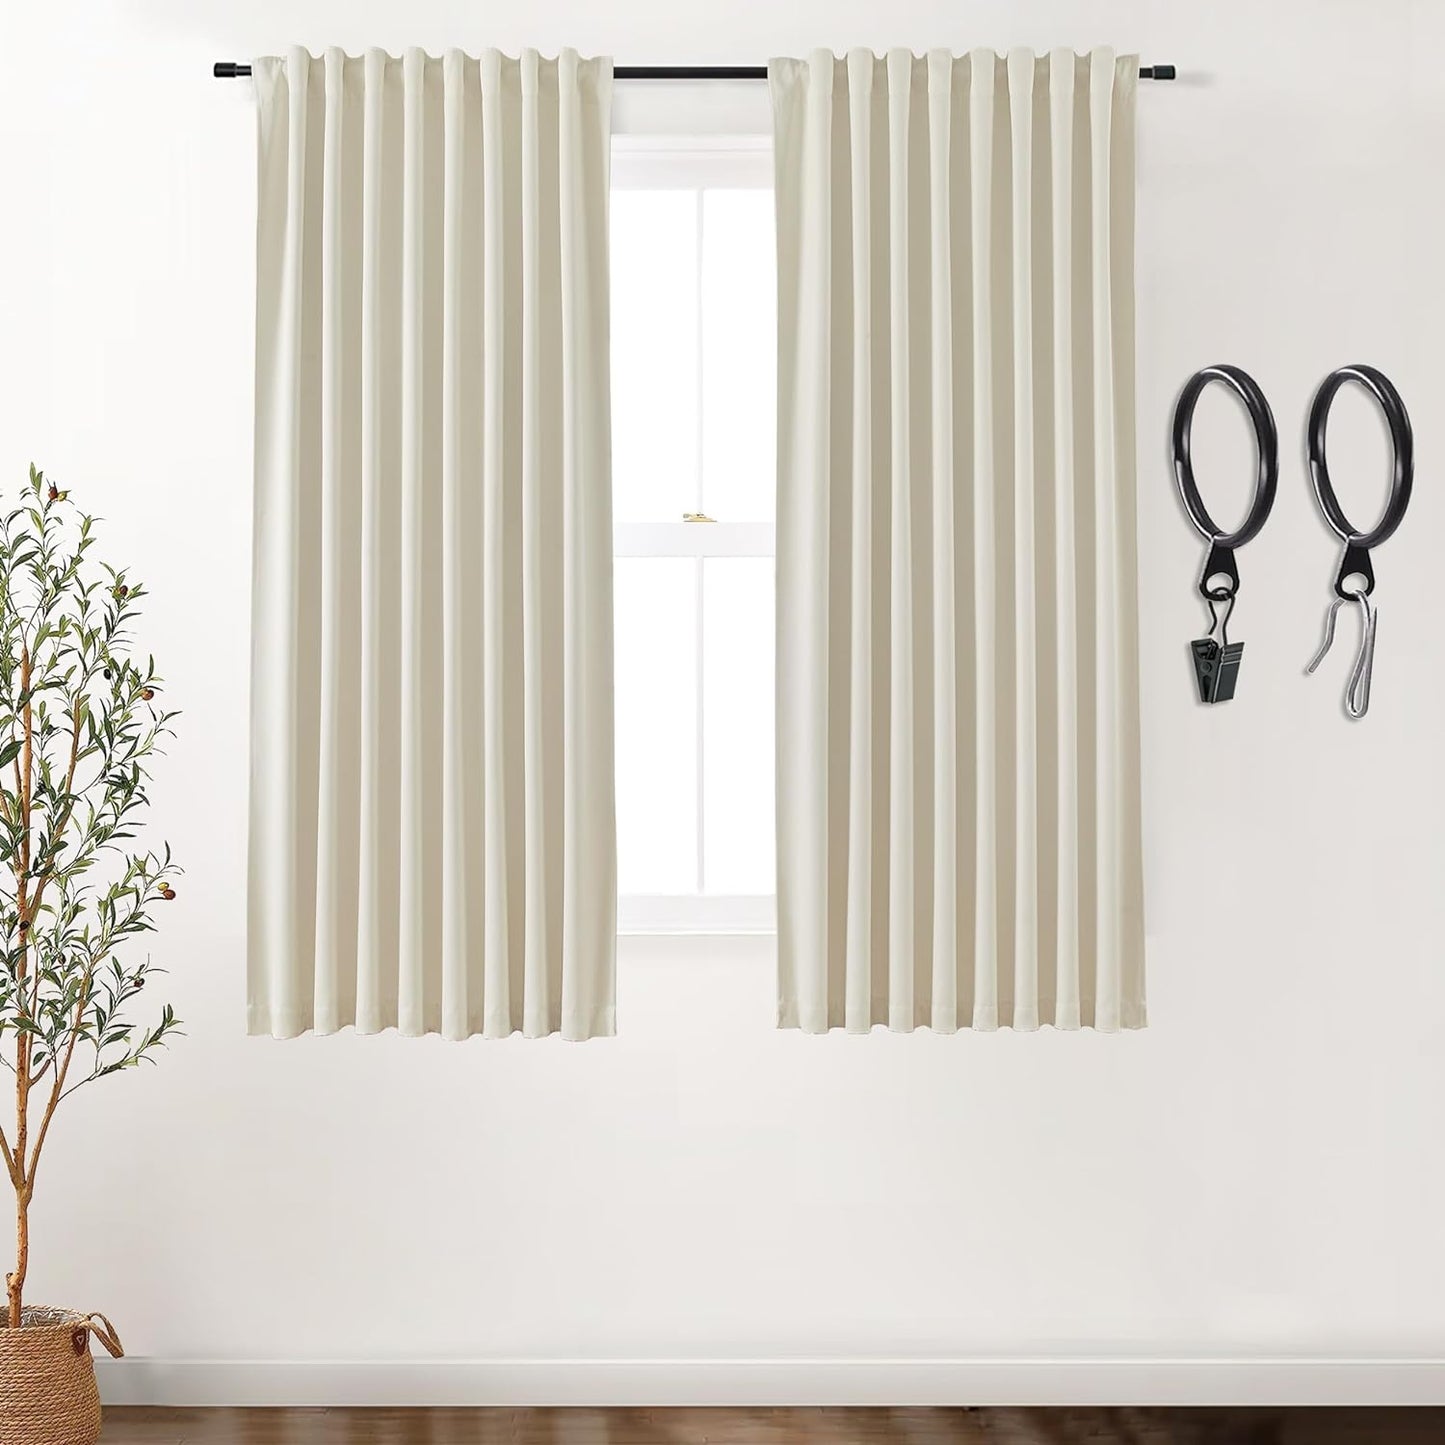 SHINELAND Beige Room Darkening Curtains 105 Inches Long for Living Room Bedroom,Cortinas Para Cuarto Bloqueador De Luz,Thermal Insulated Back Tab Pleat Blackout Curtains for Sunroom Patio Door Indoor  SHINELAND Beige 2X(52"Wx63"L) 